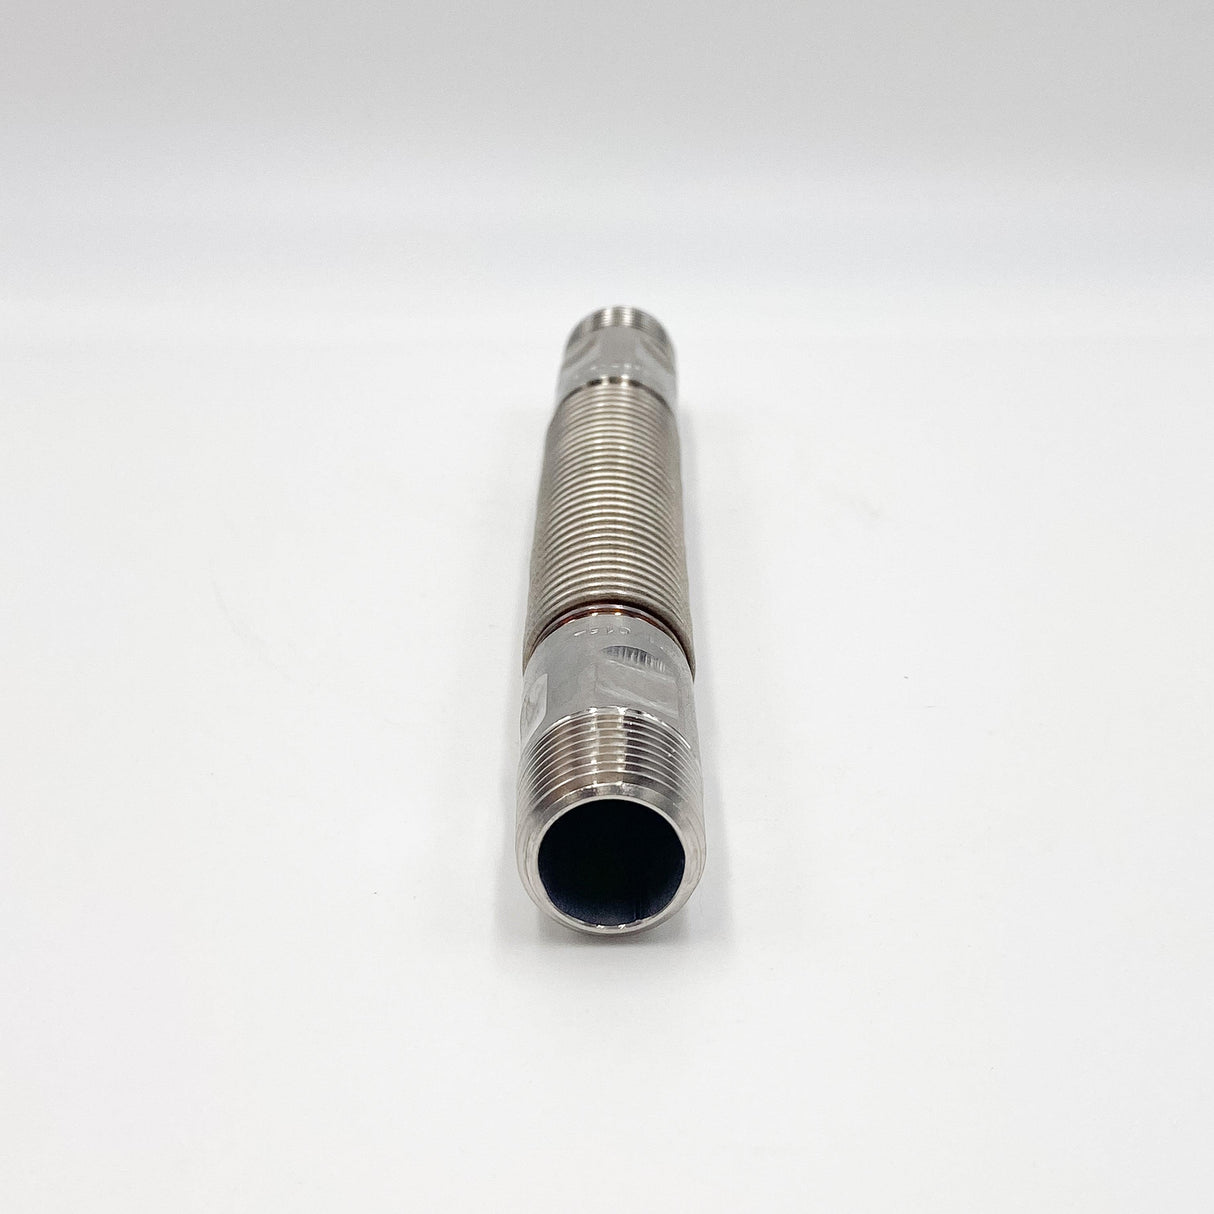 Econex GMM15 Flexible Joint - Threaded Connections